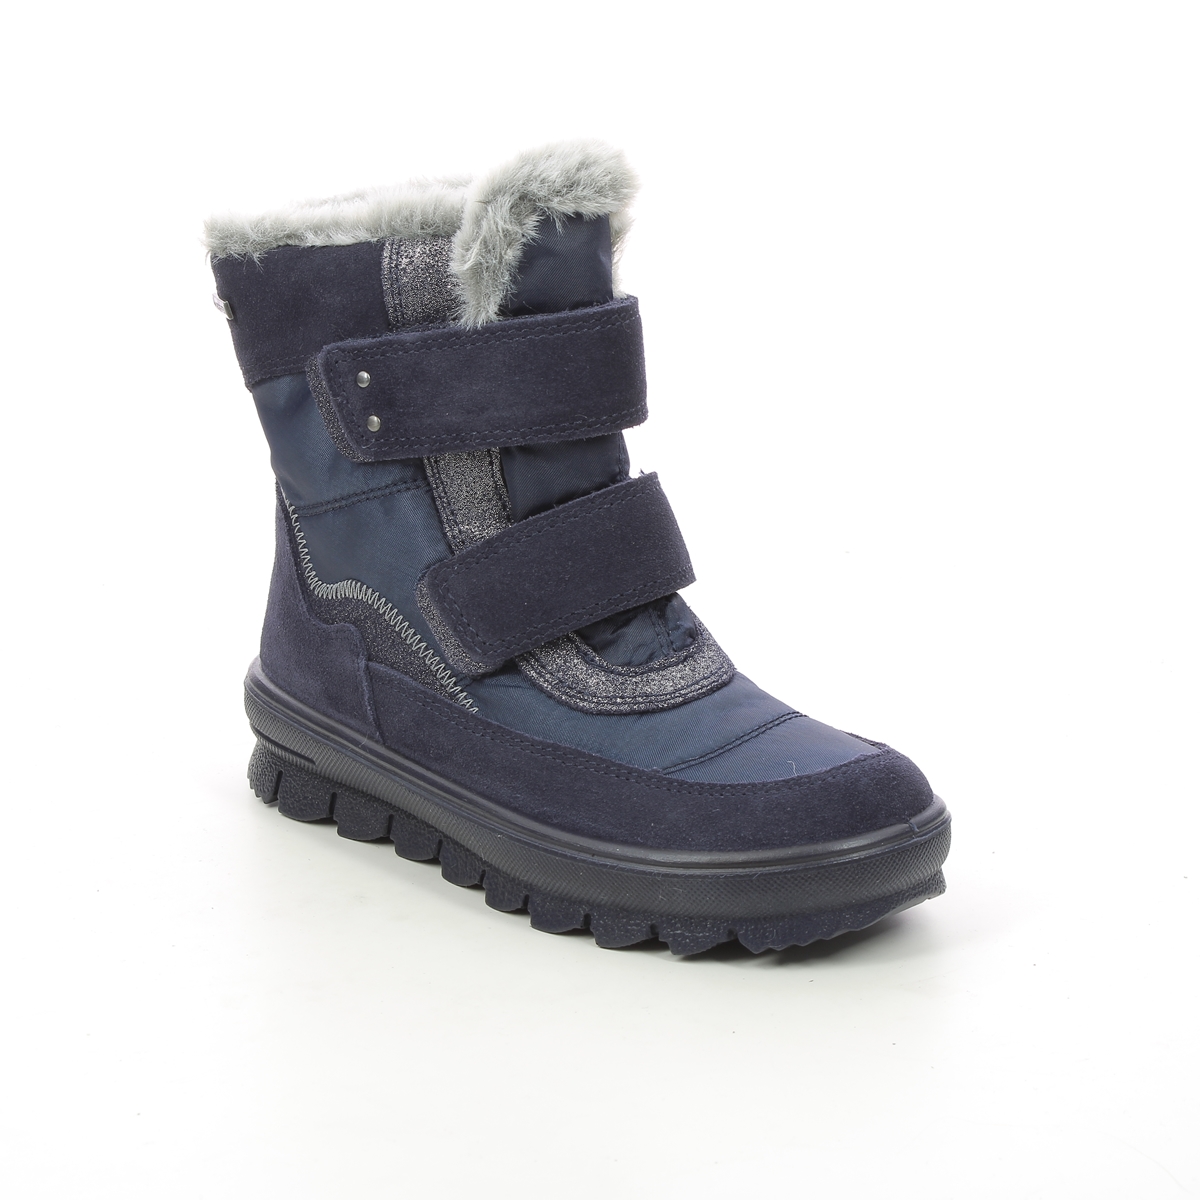 Superfit Flavia Vel Gtx Navy suede Kids Girls boots 1000218-8000 in a Plain  in Size 26